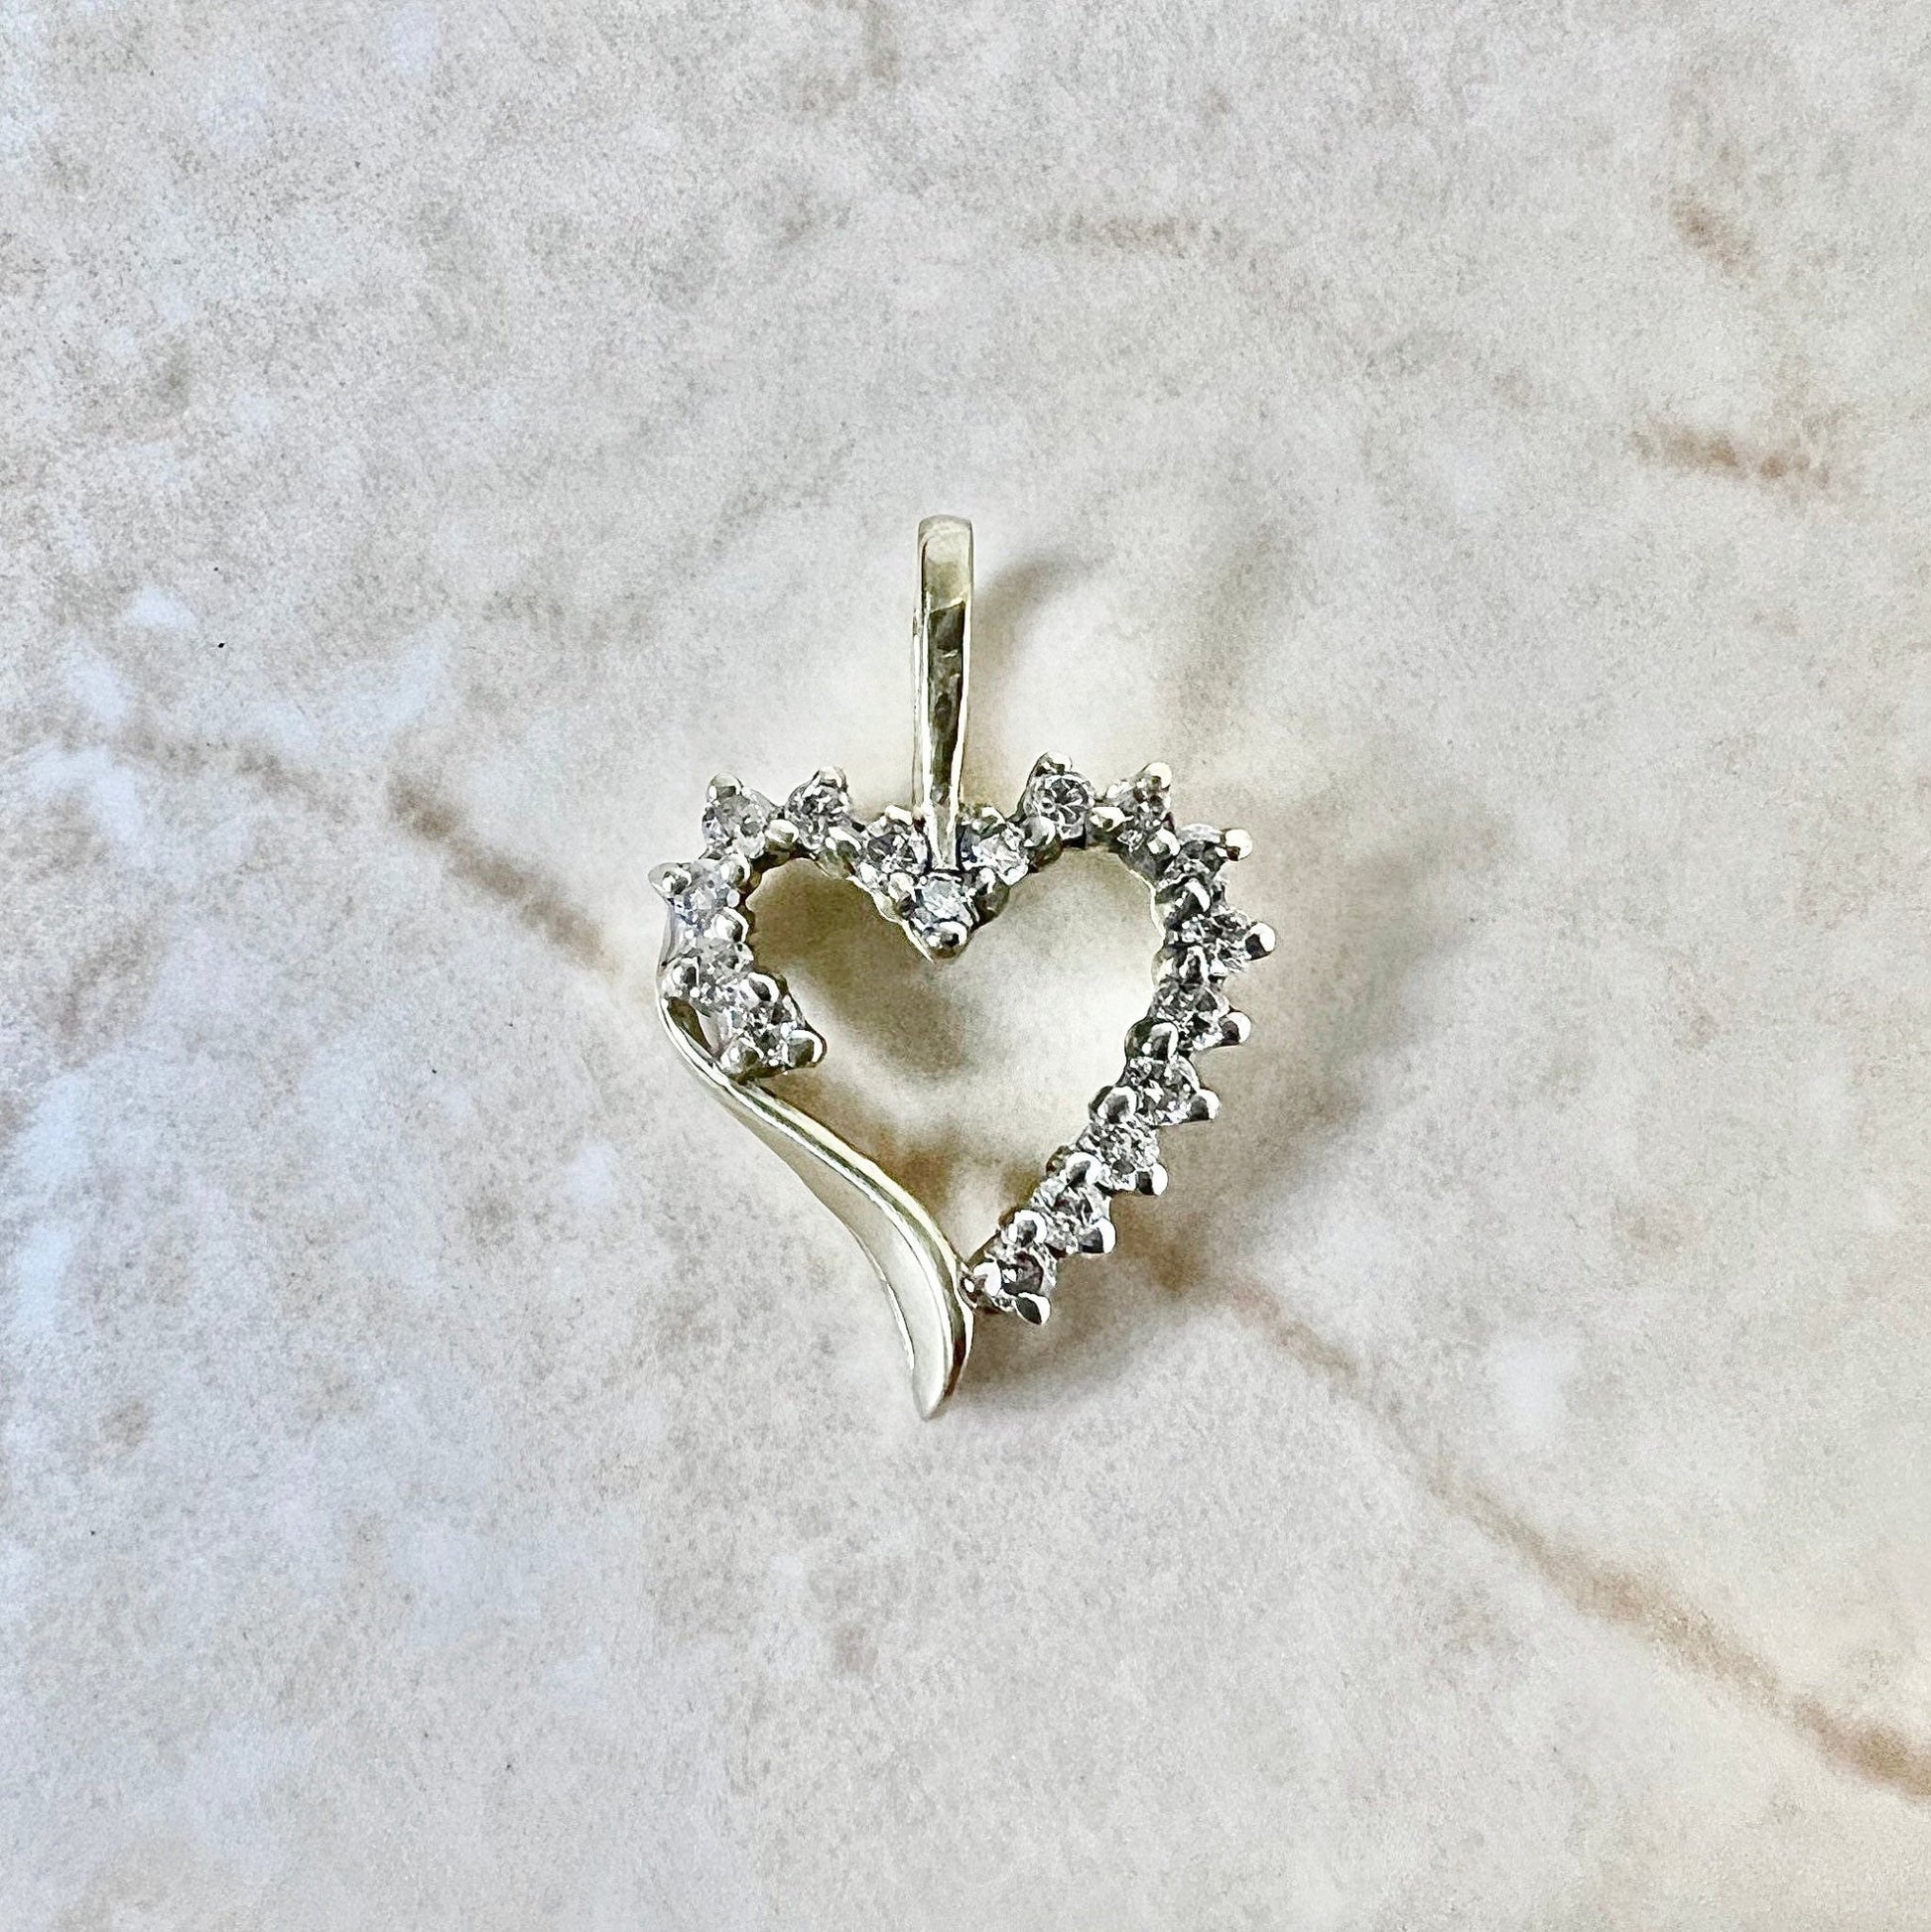 10K Diamond Heart Pendant Necklace - Yellow Gold Diamond Pendant - Gold Heart Necklace - Birthday Gift - Valentine’s Day Gift For Her